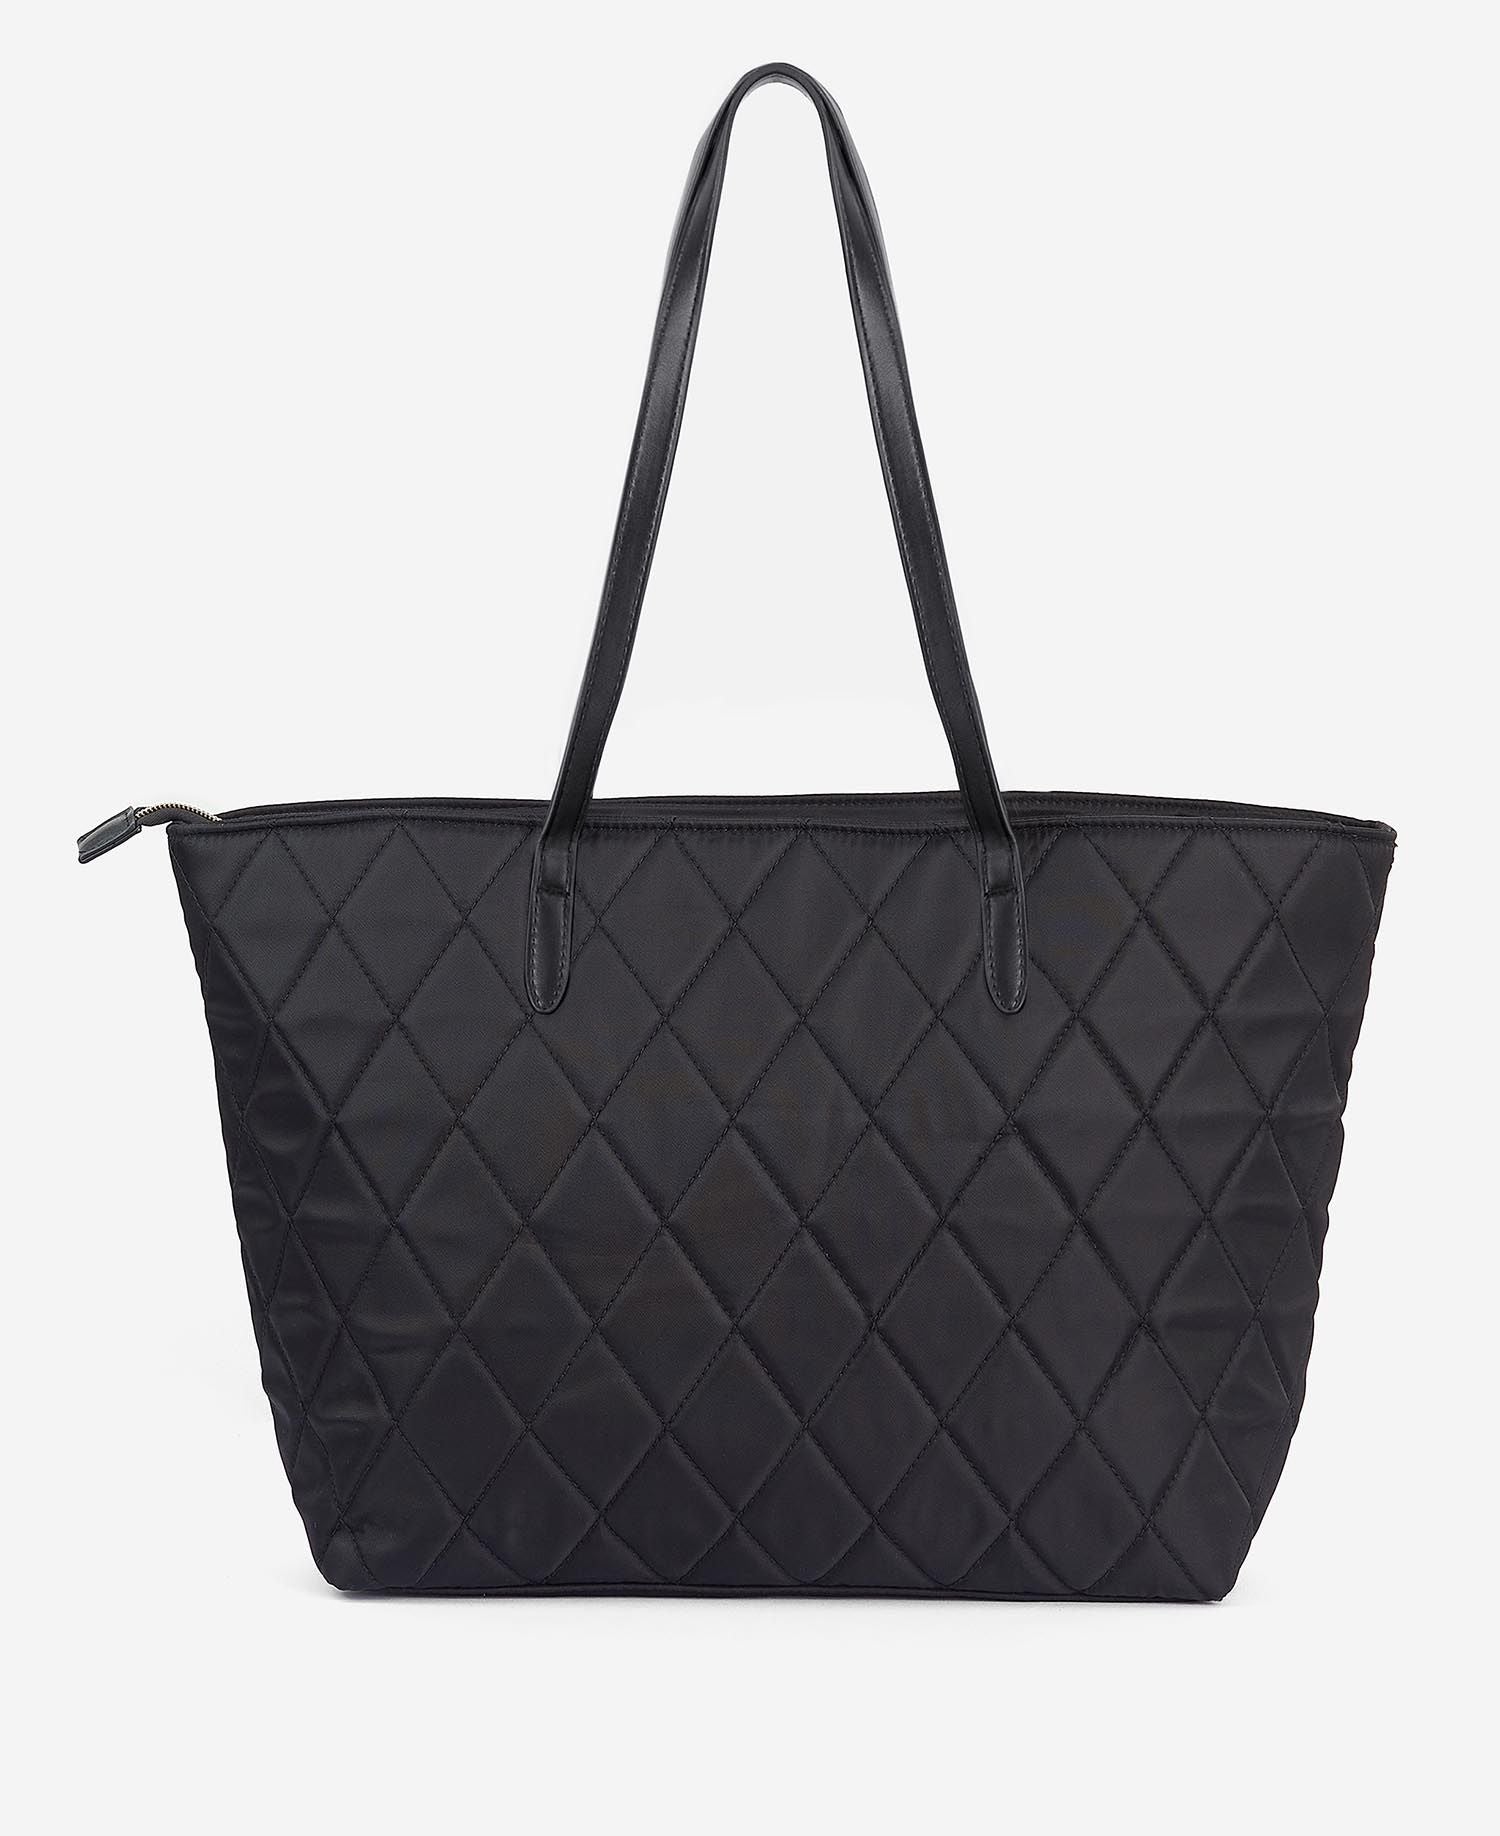 BARBOUR Women's Quilted Tote Bag LBA0395 Black